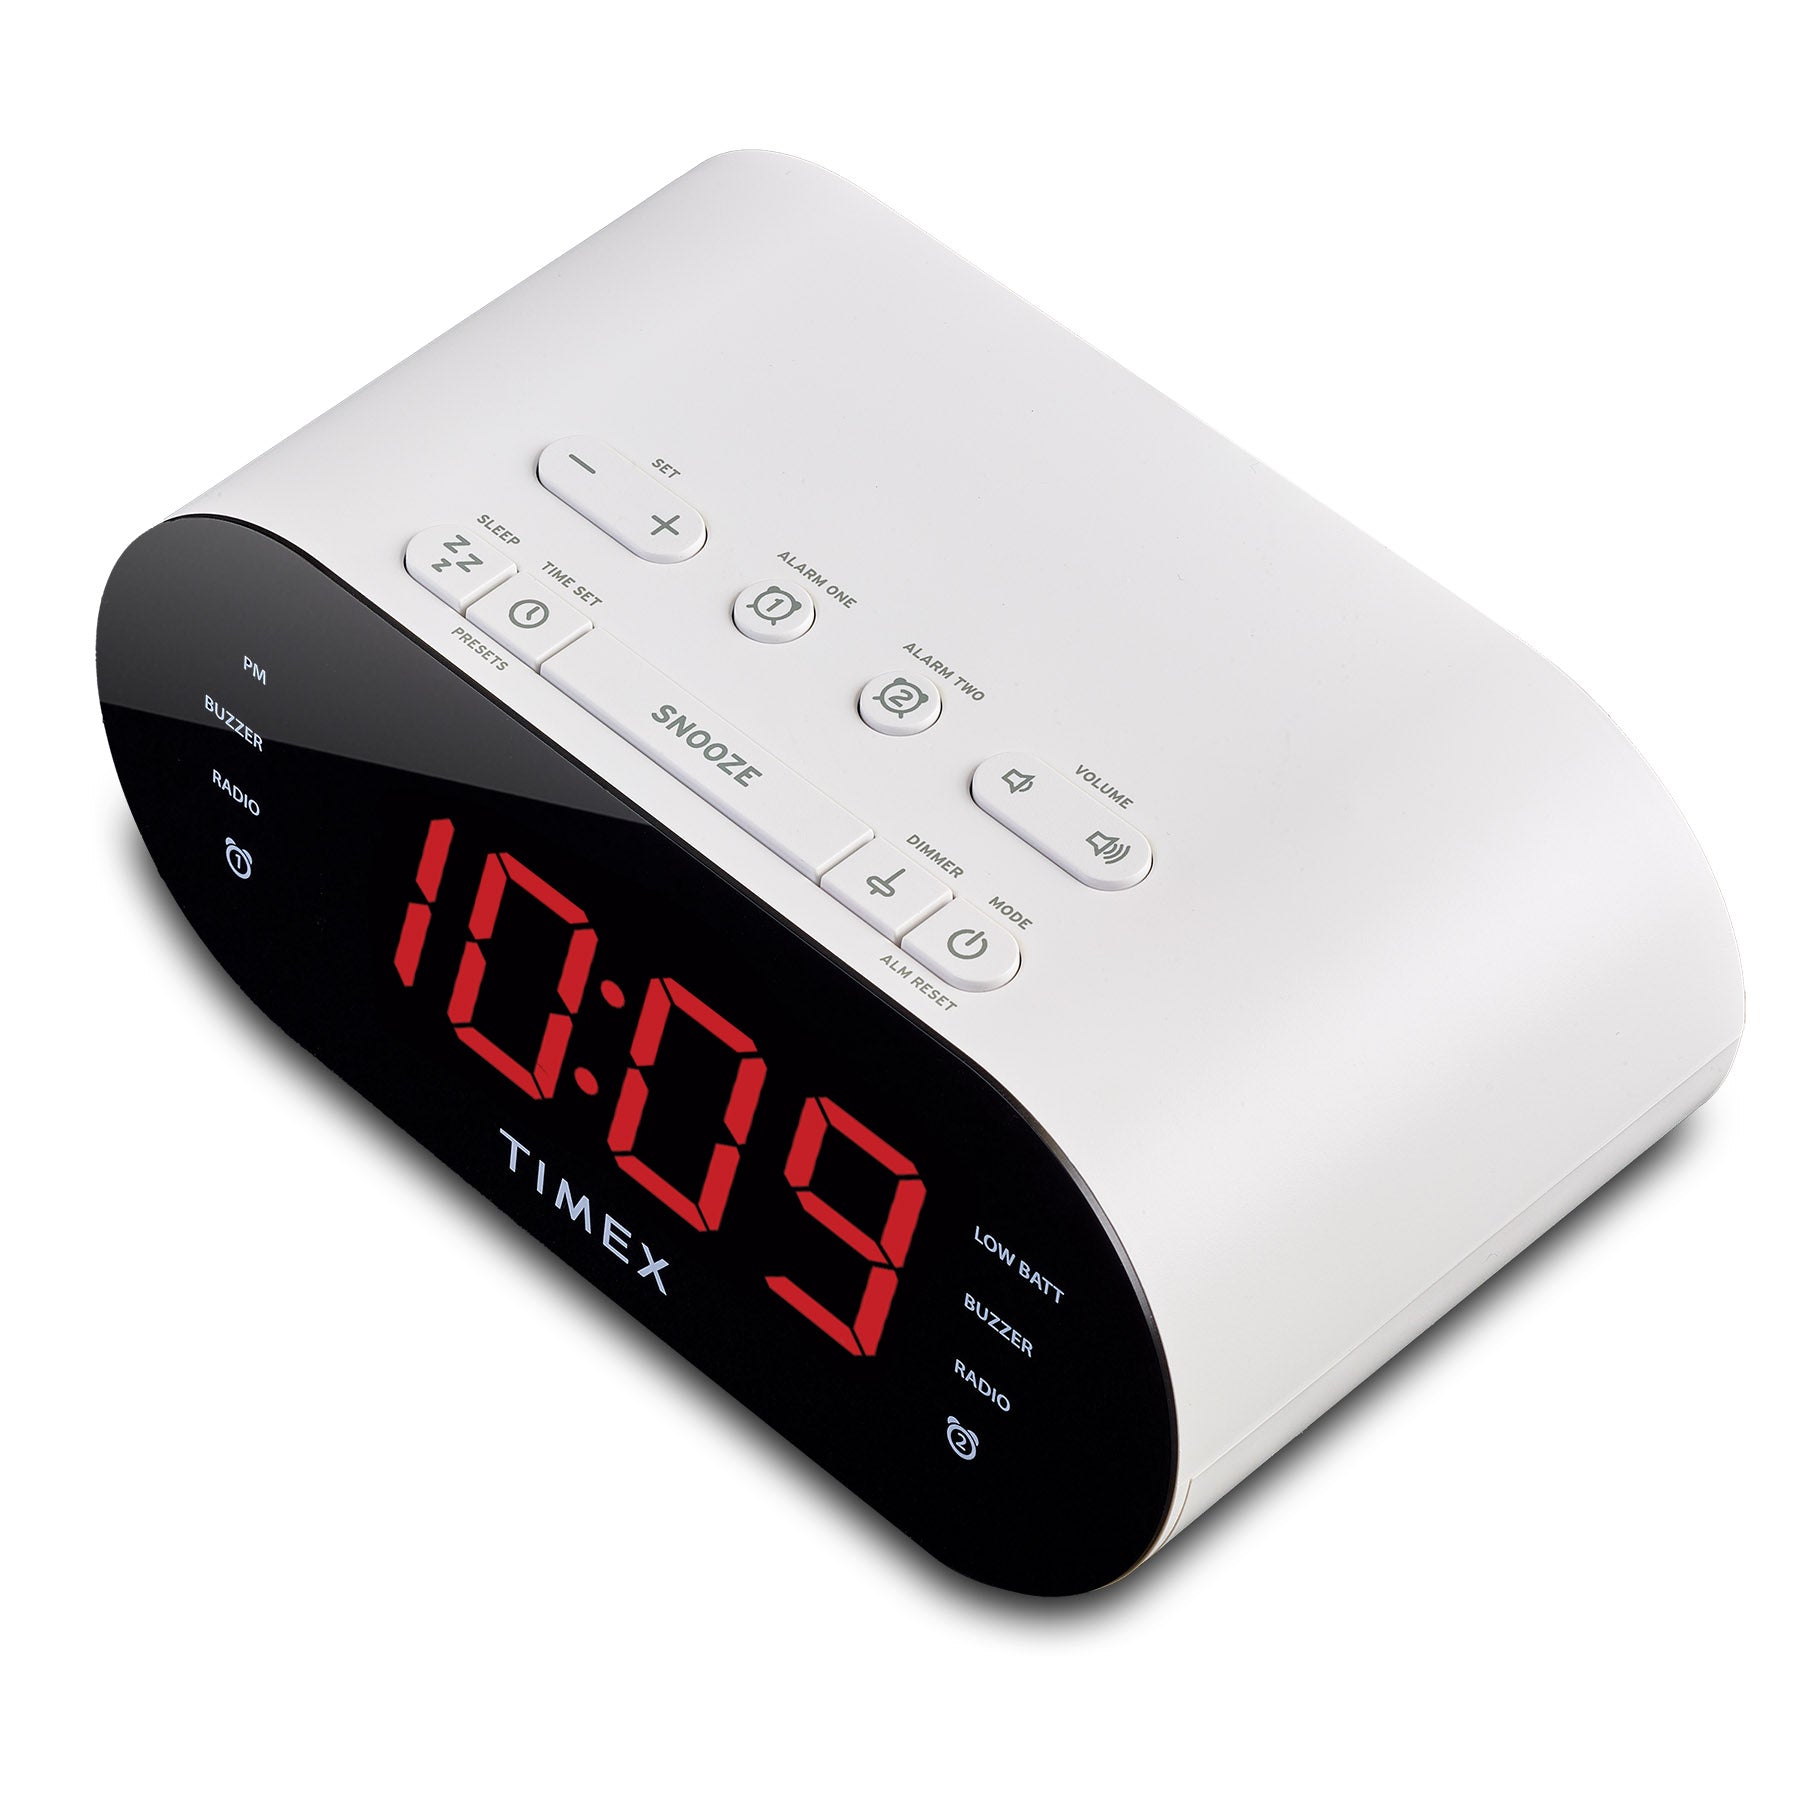 Timex Alarm Clock for Bedroom with FM Radio and USB Charging - White (T232W)